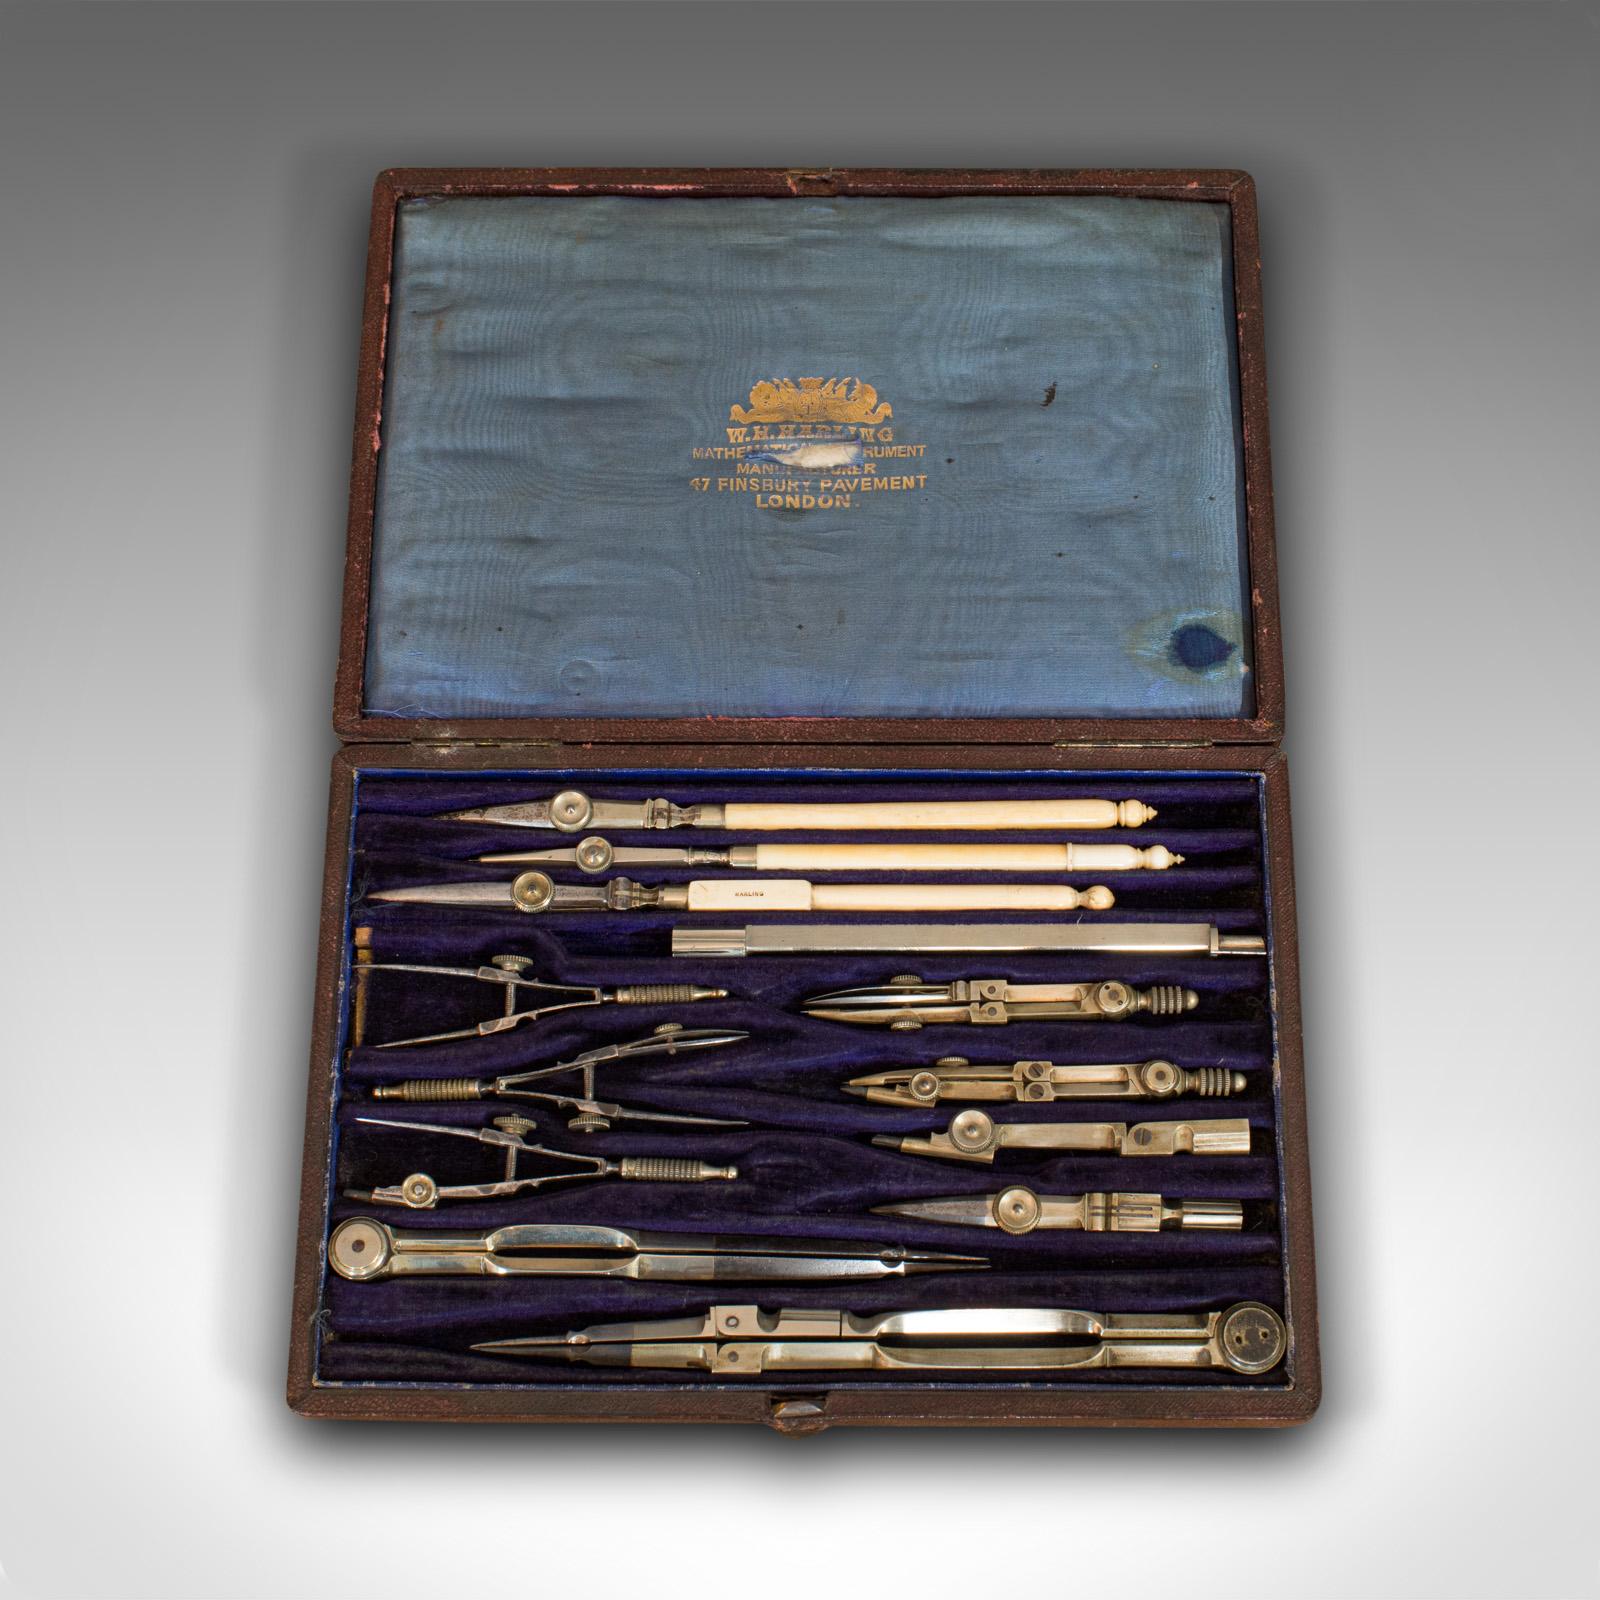 This is an antique technical drawing set. An English, silver nickel cartographer's or architect's set by Harling of London, dating to the late Victorian period, circa 1900.

Comprehensive, late Victorian precision instrument case
Displays a